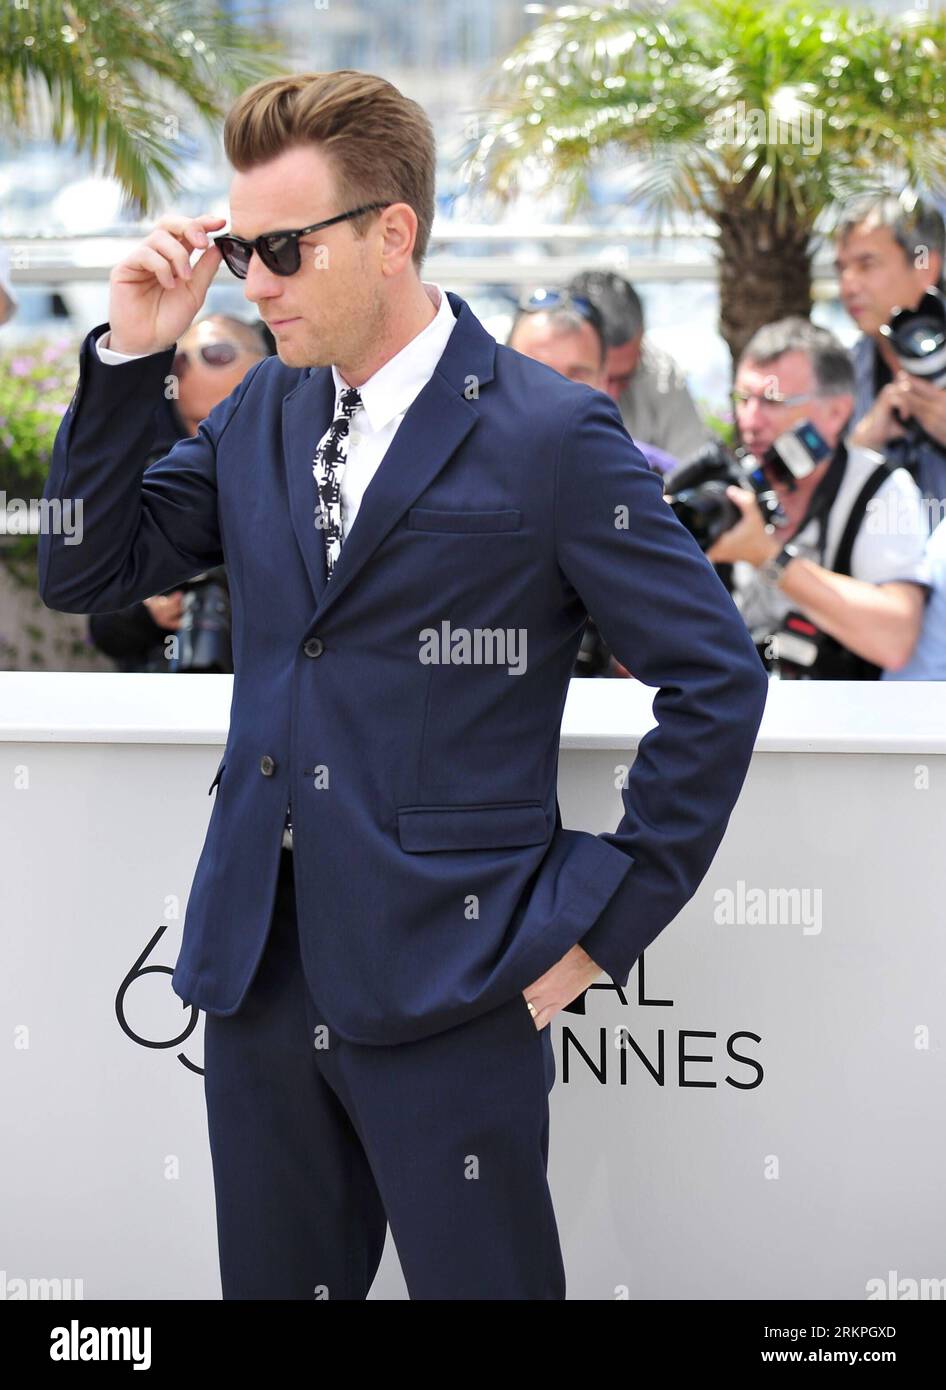 Bildnummer: 57995594  Datum: 16.05.2012  Copyright: imago/Xinhua (120516) -- CANNES, May 16, 2012 (Xinhua) -- The feature film jury of the 65th Cannes Film Festival, British actor Ewan Mc Gregor poses for photos during a photocall in Cannes, southern France, on May 16, 2012. The festival kicked off here on Wednesday. (Xinhua/Ye Pingfan) (zjl) RANCE-CANNES-FILM FESTIVAL-PHOTOCALL-JURY PUBLICATIONxNOTxINxCHN Kultur Entertainment People Film 65. Internationale Filmfestspiele Cannes Photocall Porträt x0x xst 2012 hoch Highlight premiumd      57995594 Date 16 05 2012 Copyright Imago XINHUA  Cannes Stock Photo